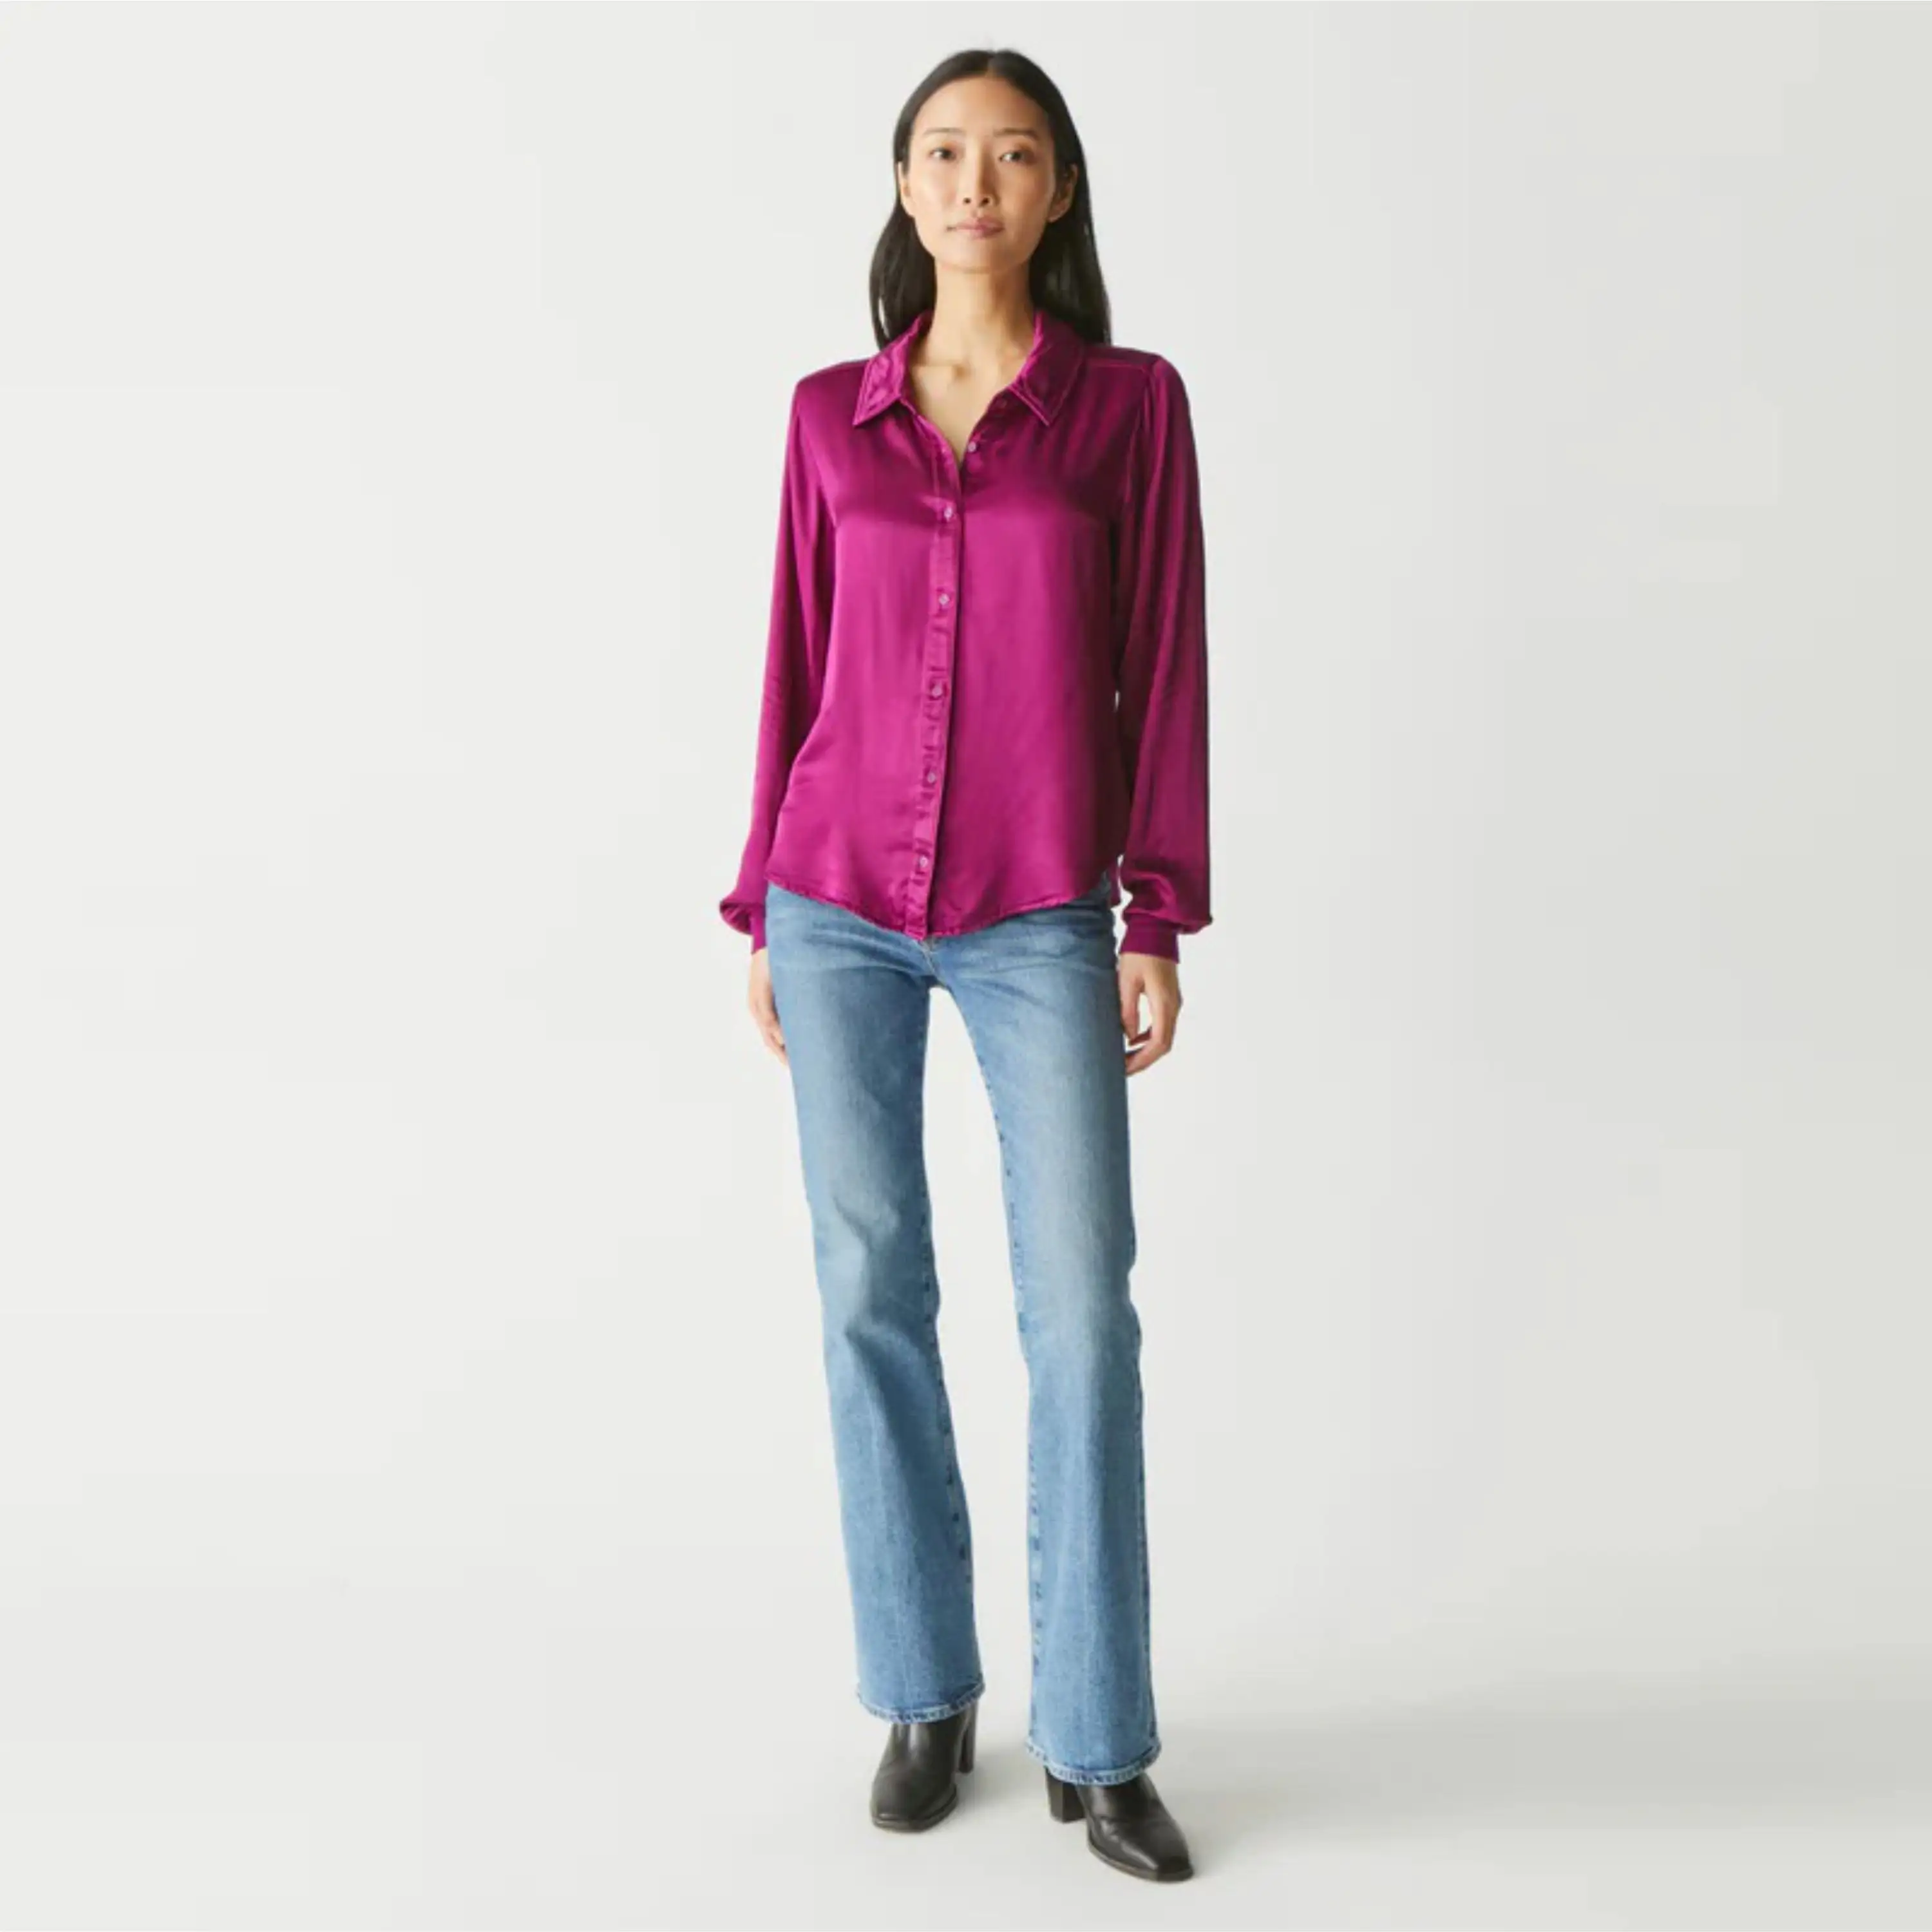 Stylish Women's Satin Blouse - Smooth and Silky Texture, Ideal for Professional and Casual Wear, Comes in a Variety of Shades